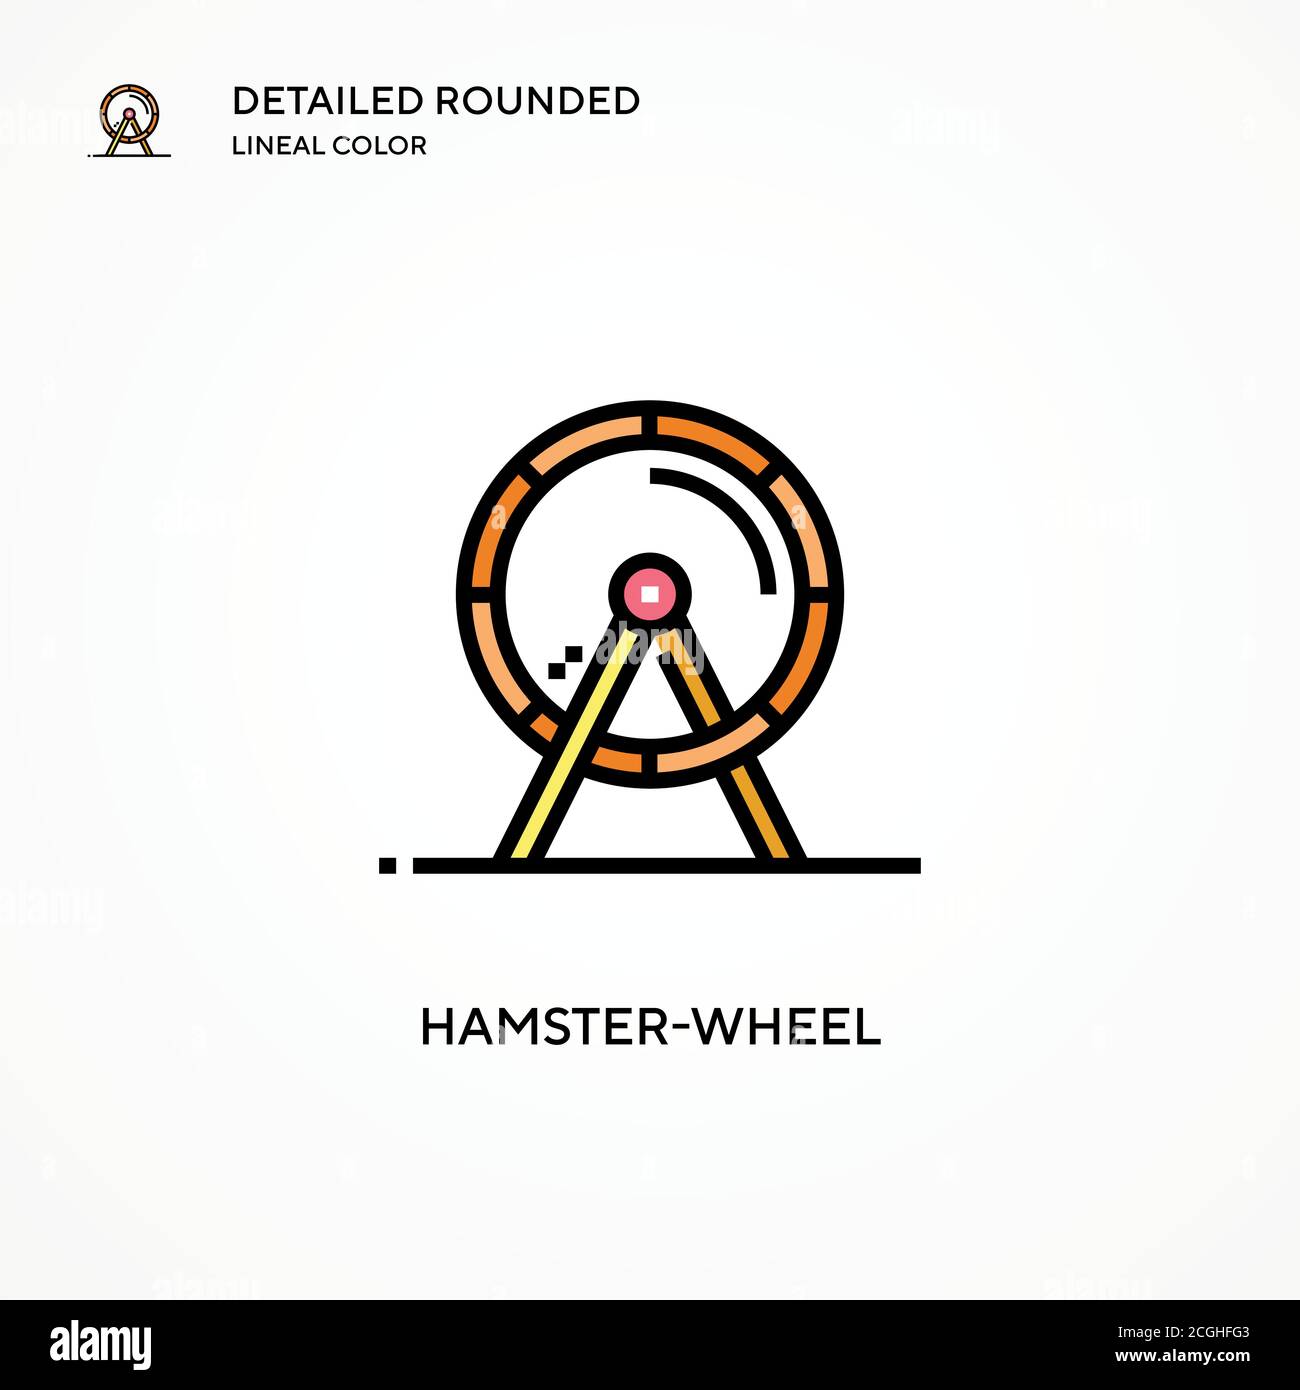 Hamster-wheel vector icon. Modern vector illustration concepts. Easy to edit and customize. Stock Vector